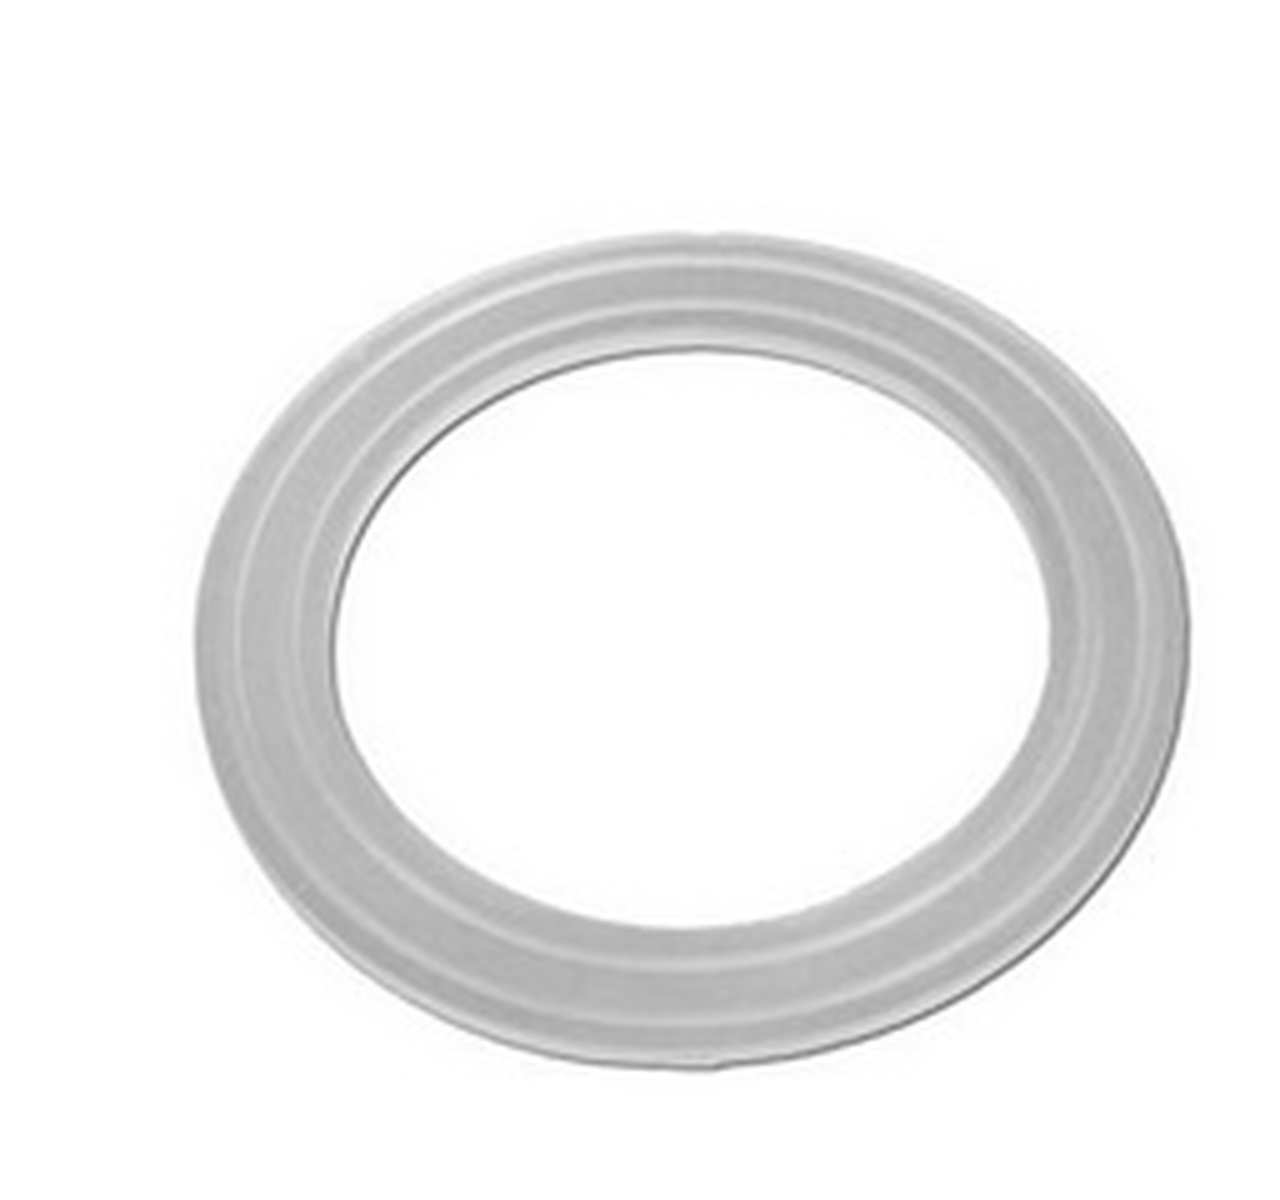 HYDRO-AIR FACE FLANGE GASKET